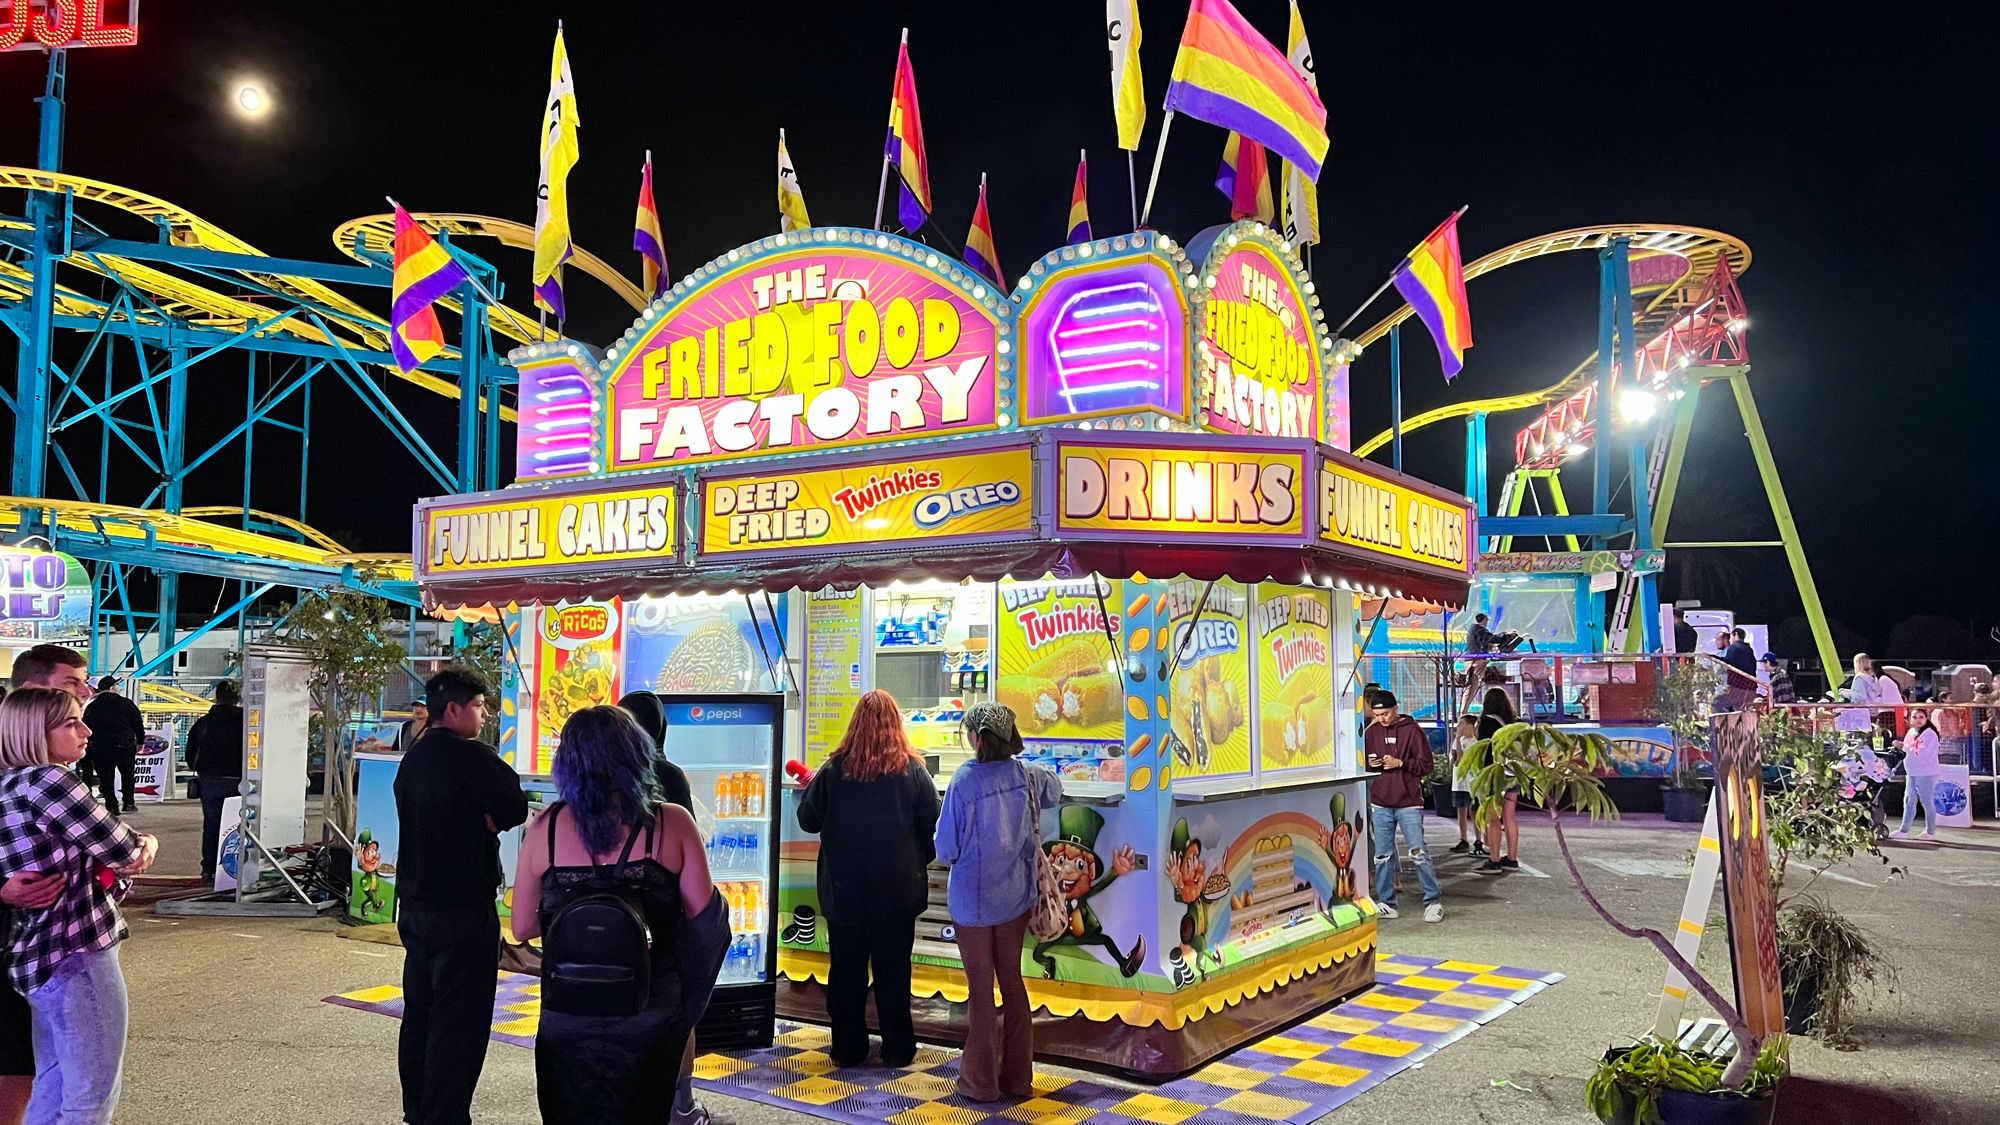 Ventura County Fair The Fried Food Factory